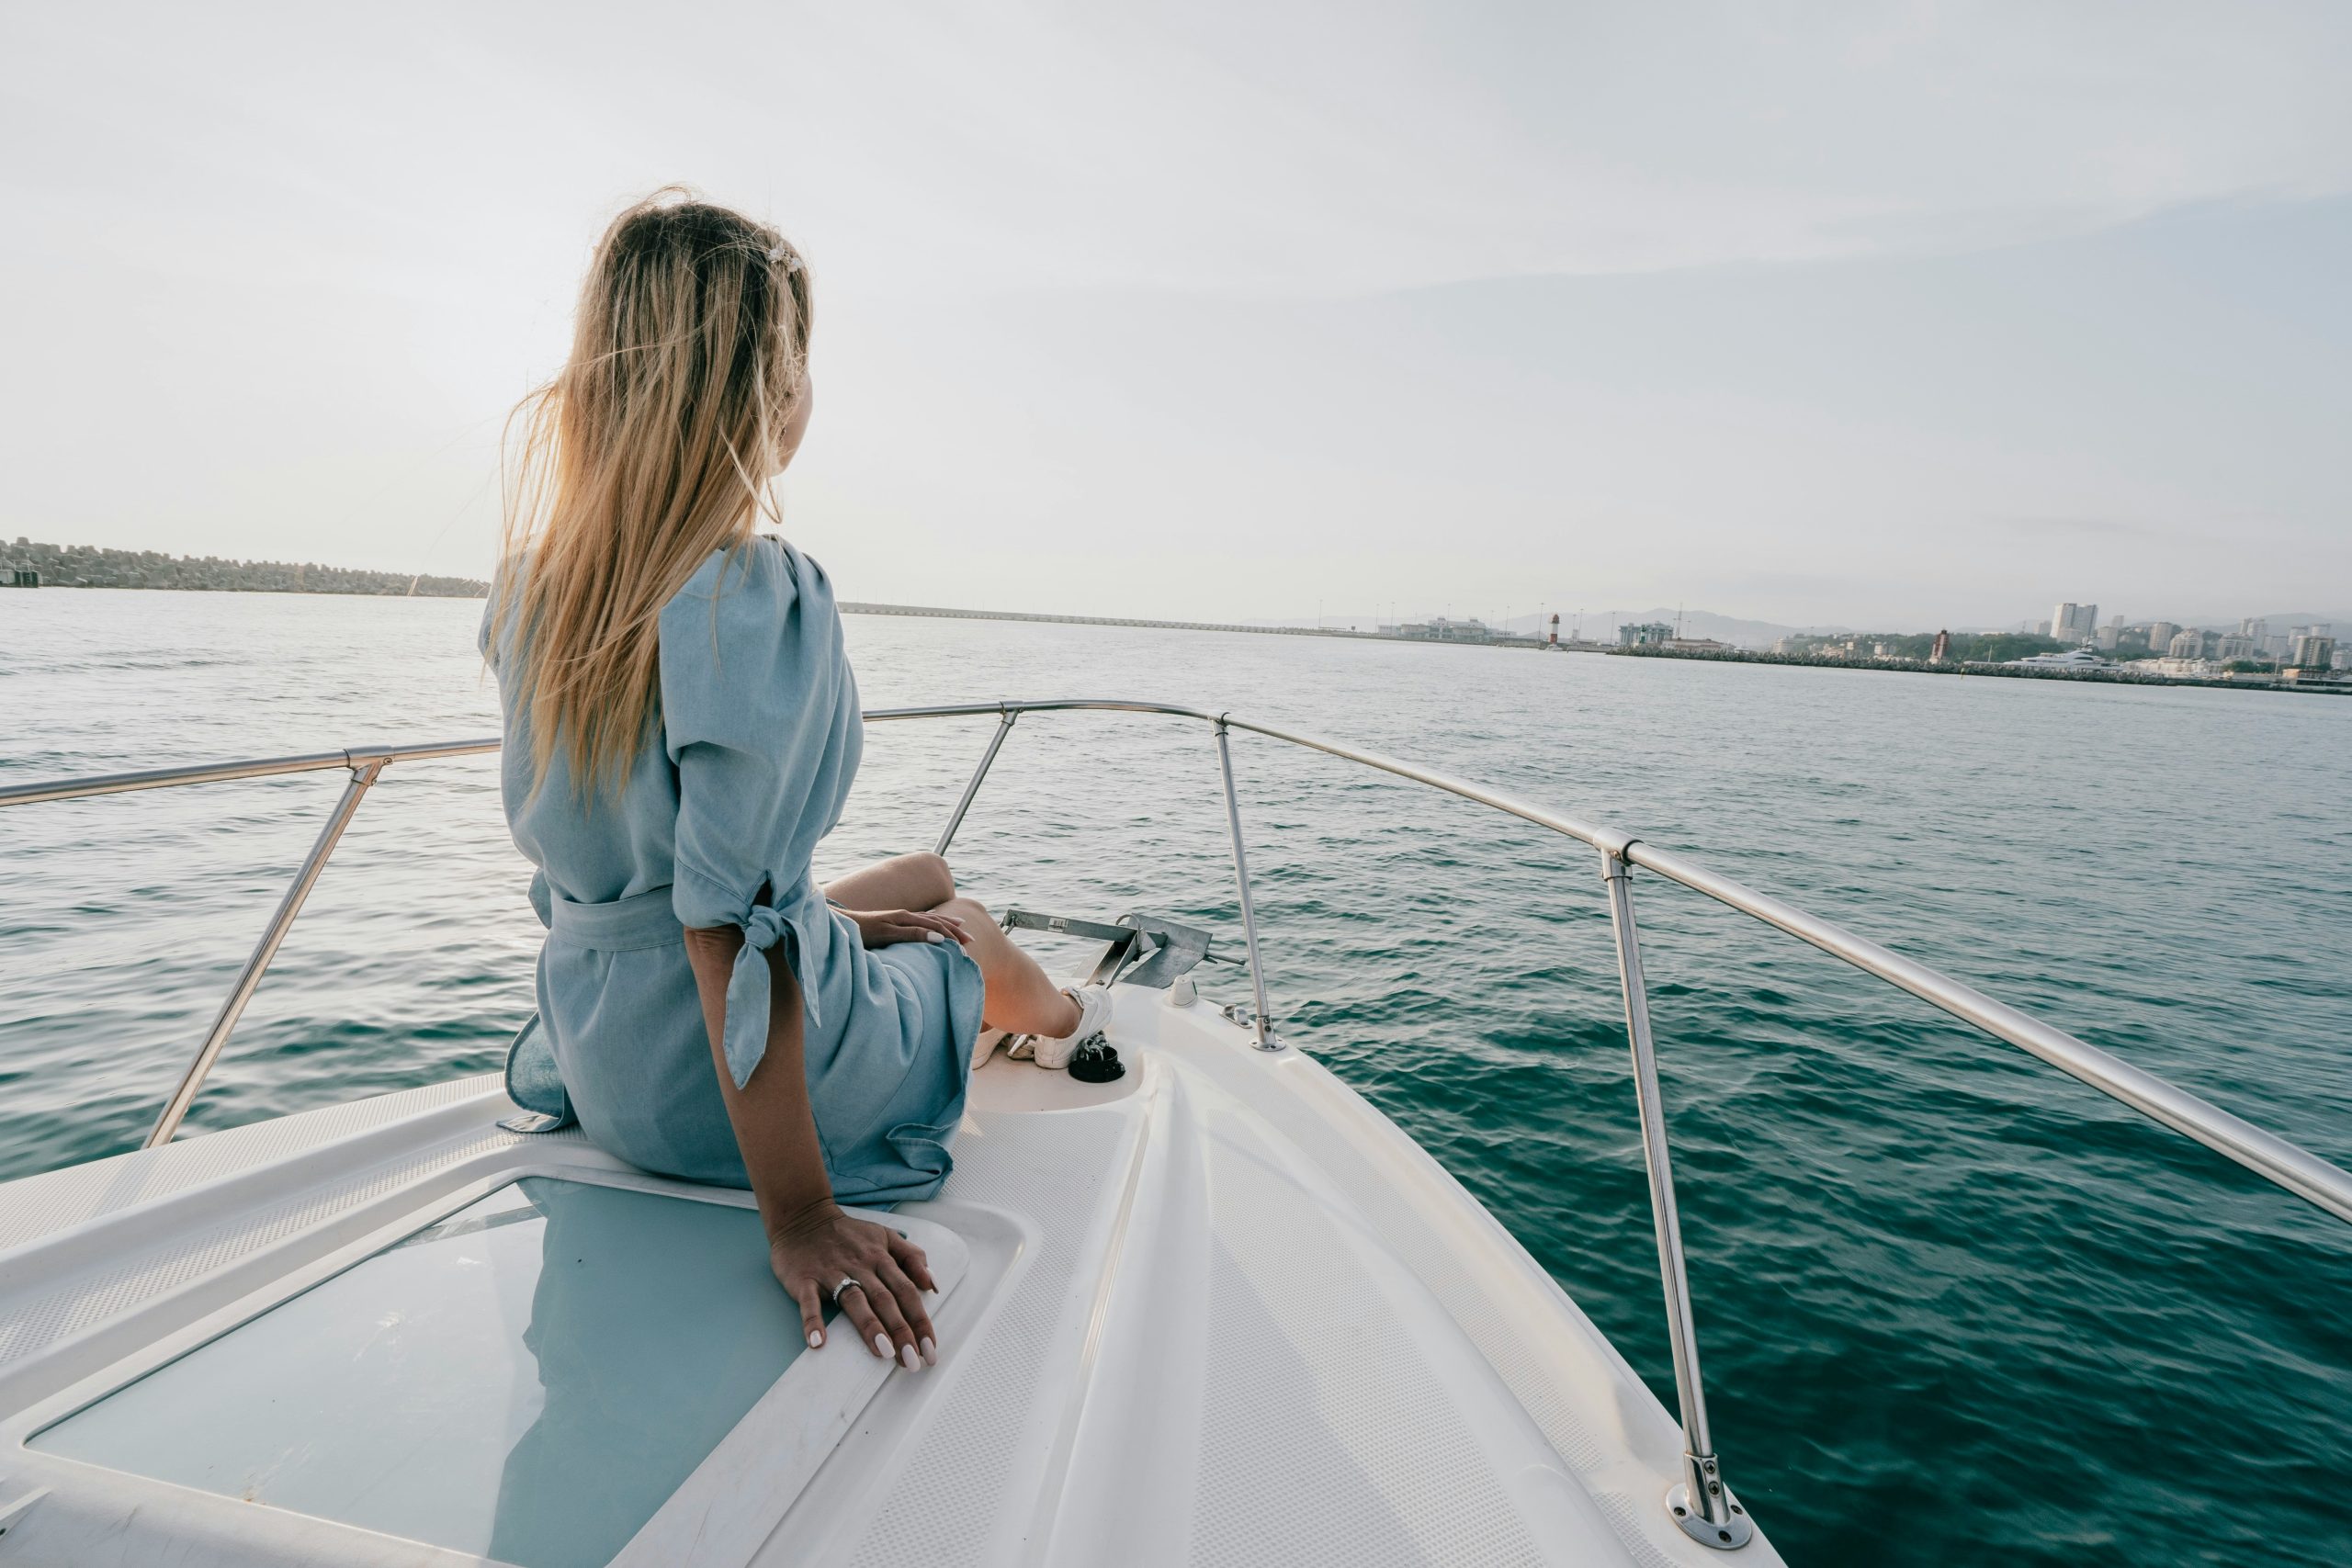 explore the world of yachting with luxury boat charters, sailing adventures, and exclusive yacht vacations.